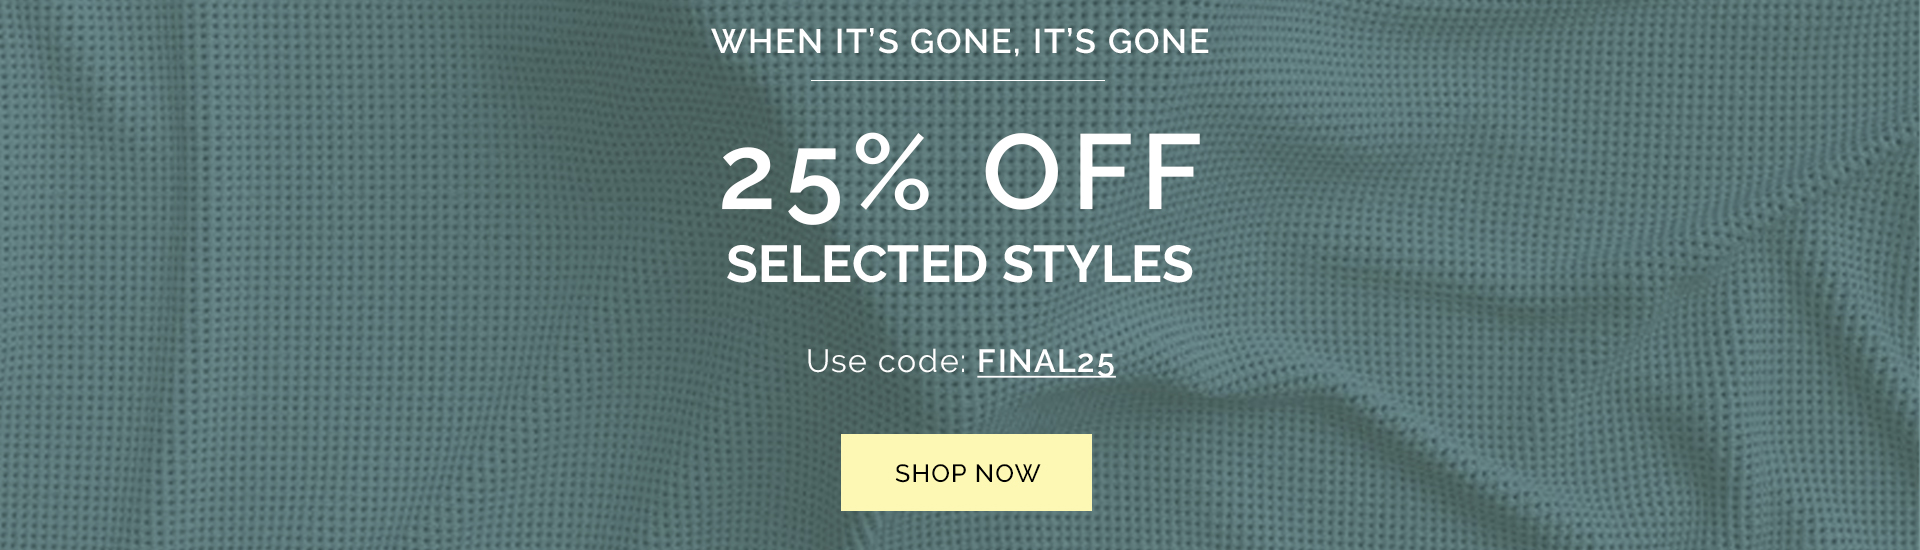 When it's gone, it's gone | 25% Off Selected Styles | Use Code: FINAL25 | Shop Now